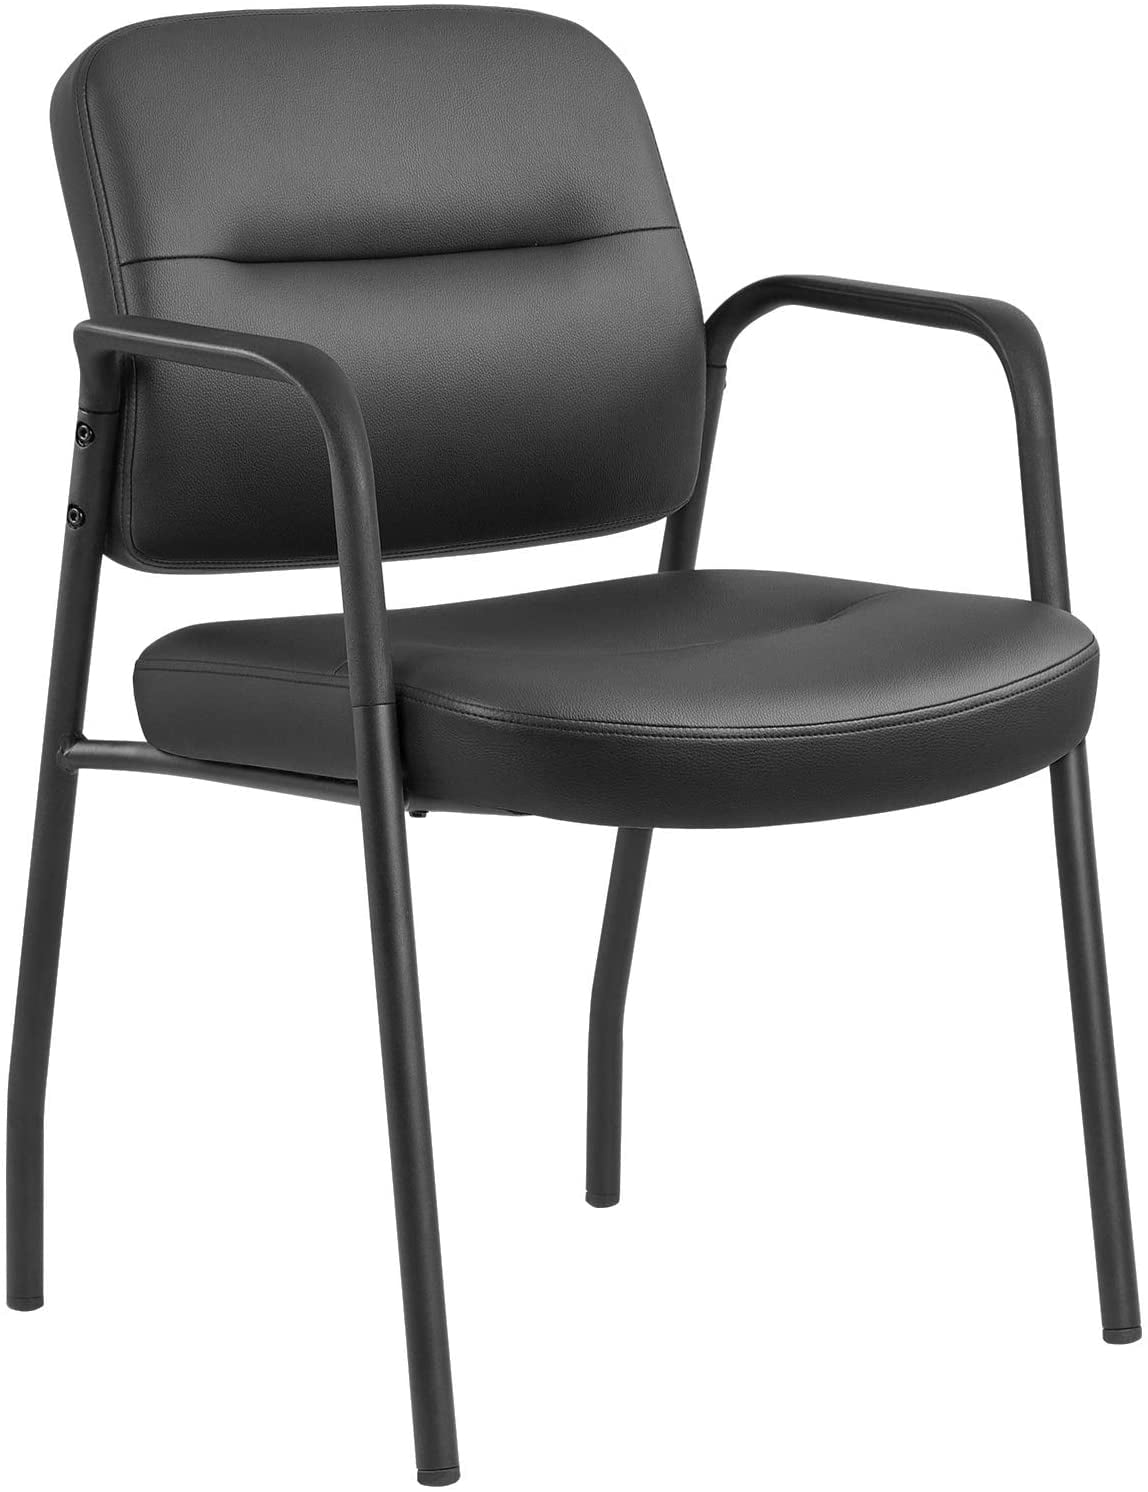 Walnew Office Guest Chair Reception Chair Leather Executive Side Chair ...